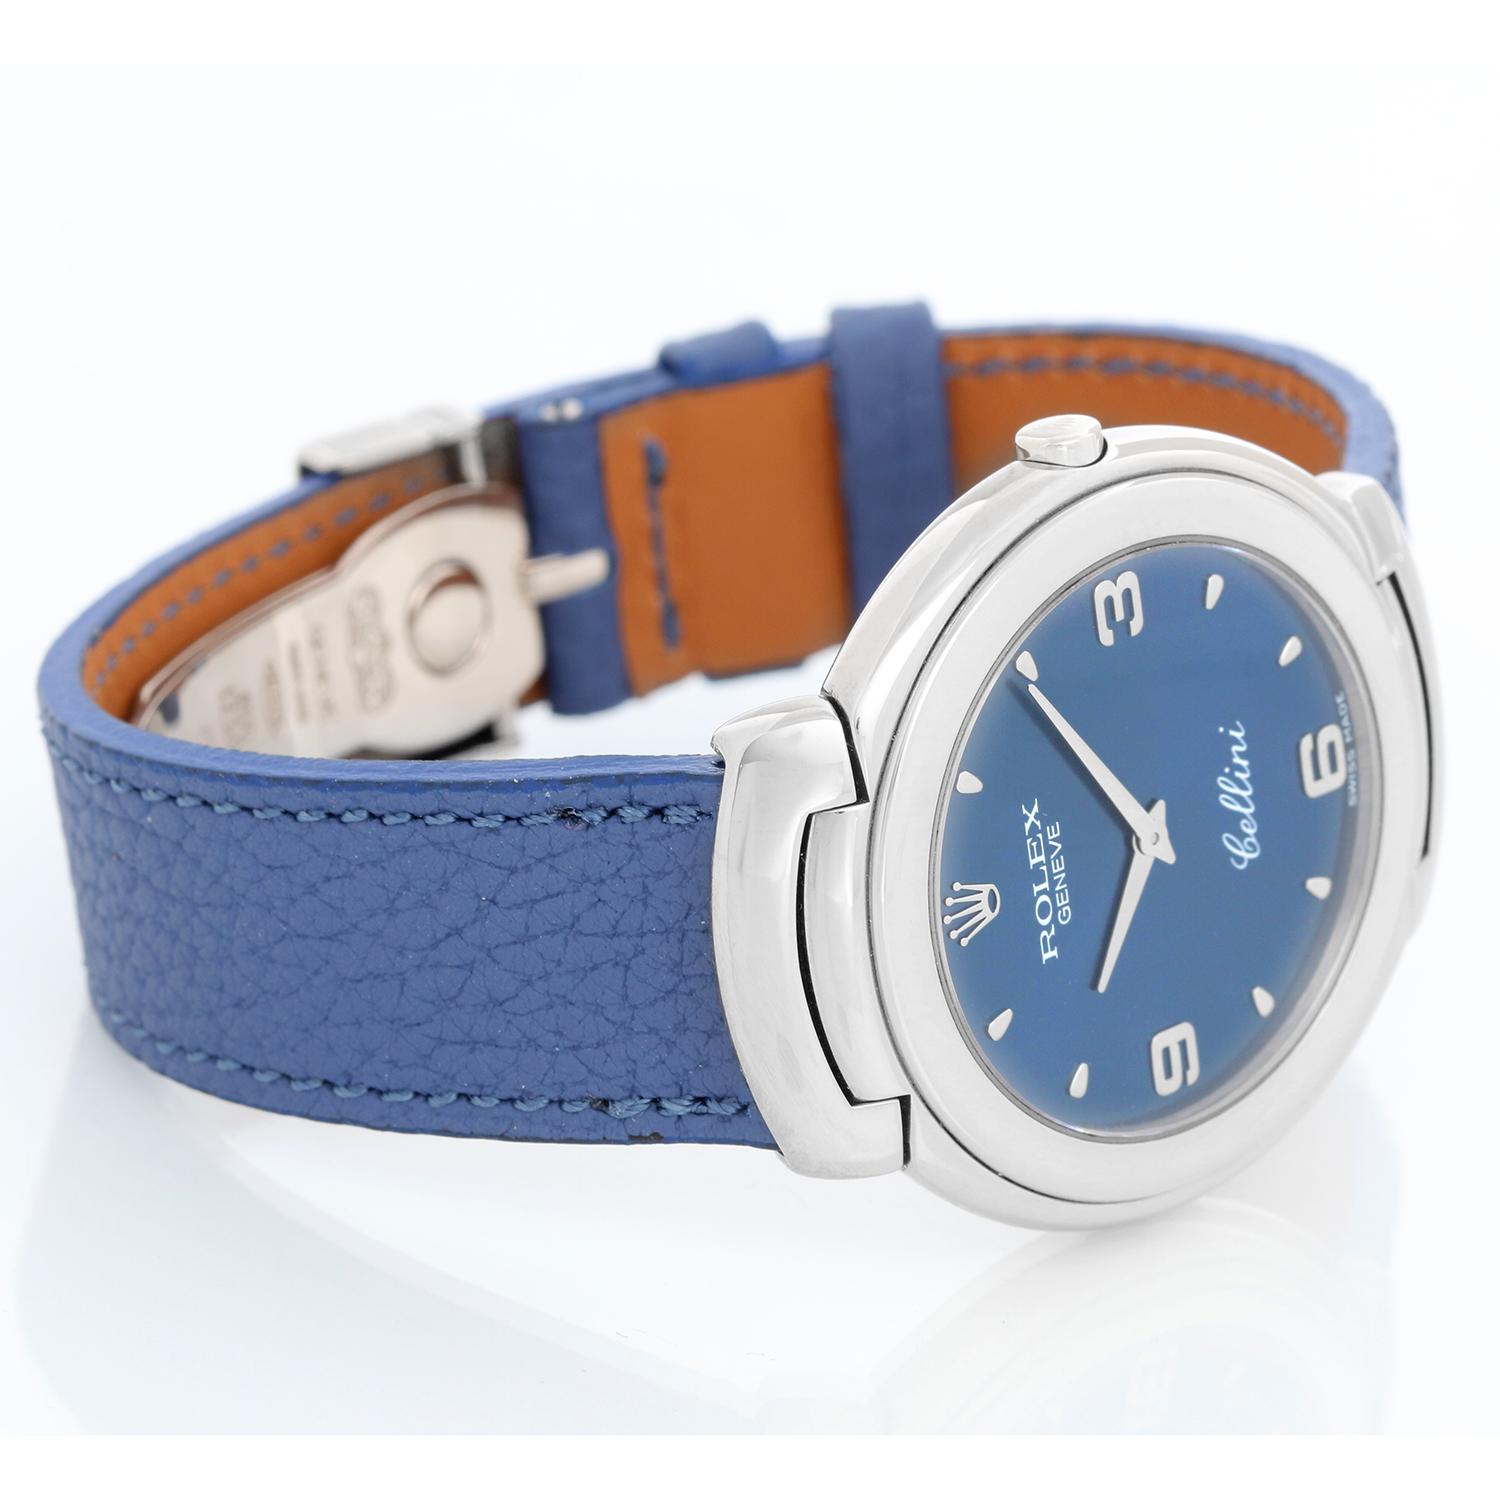 Rolex Cellini  Quartz 18k White Gold Men's Watch 6623 - Quartz. 18k white gold case (37 mm ). Blue dial with Arabic numerals at  3, 6 and 9 numerals. Blue strap with 18K White gold tang buckle . Pre-owned with Rolex box.